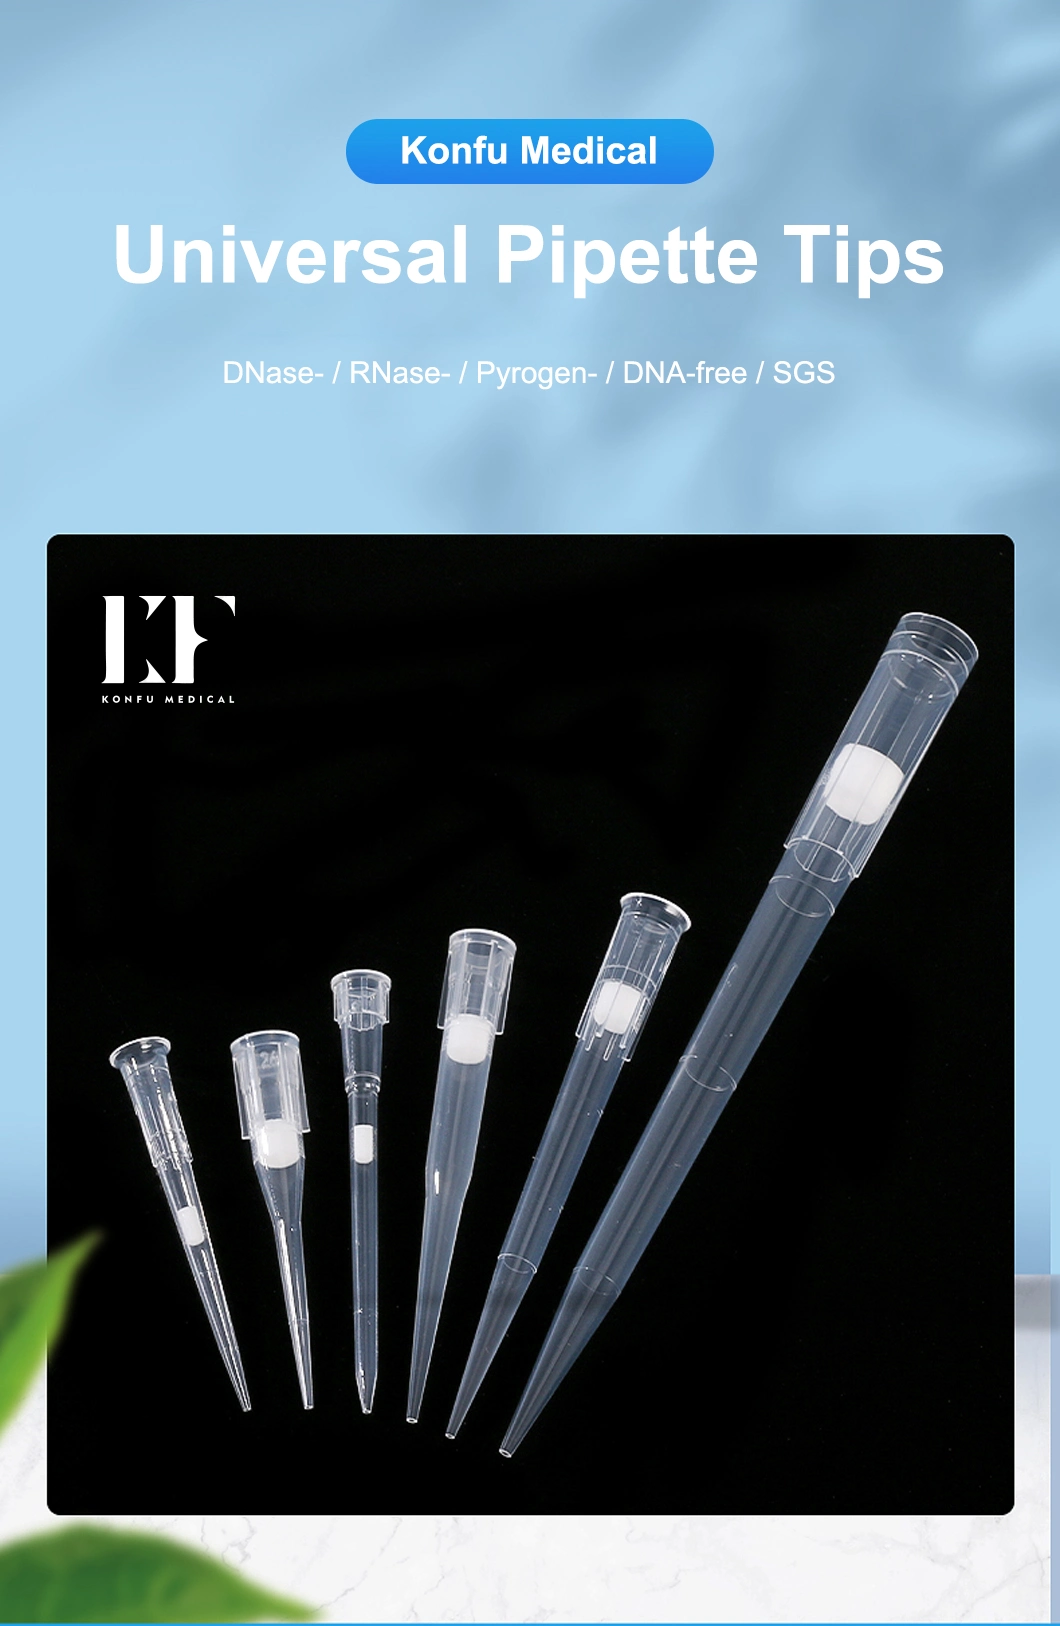 High Quality Disposable Autoclaving Sterile Universal Plastic Laboratory Supplies Extended Length Racked Pipette Tips with Filter 10UL